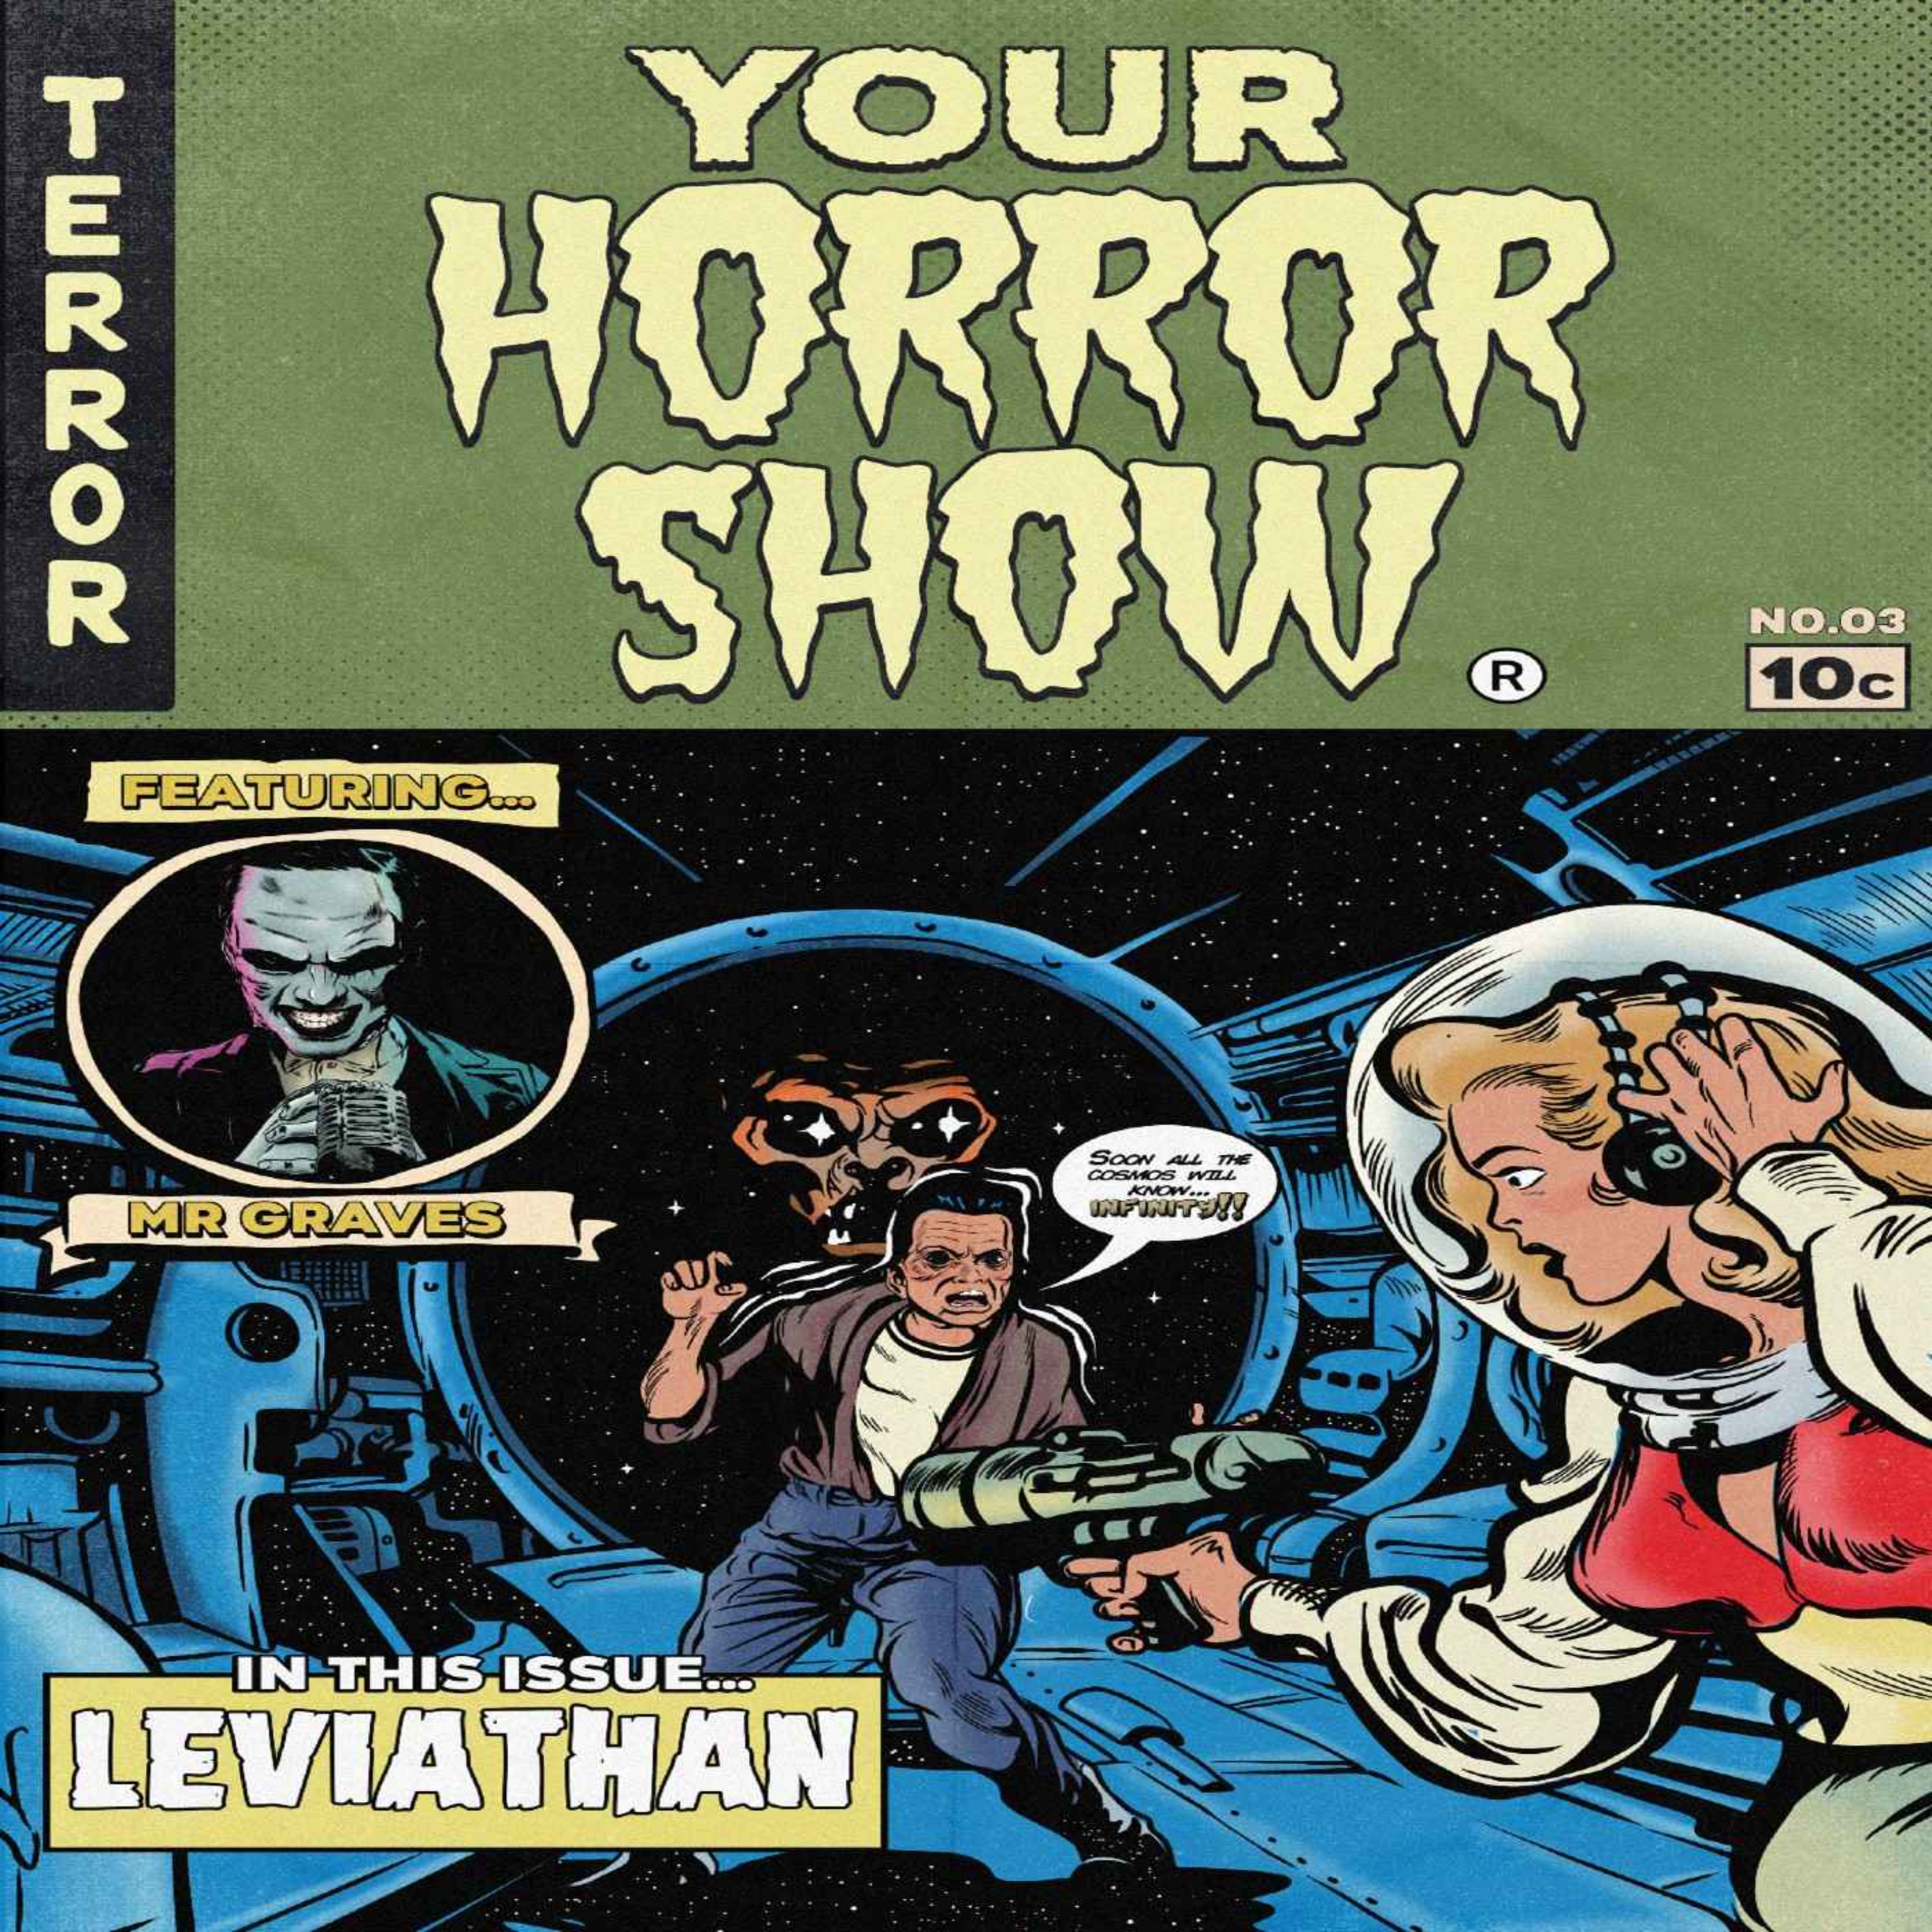 cover art for "Leviathan"